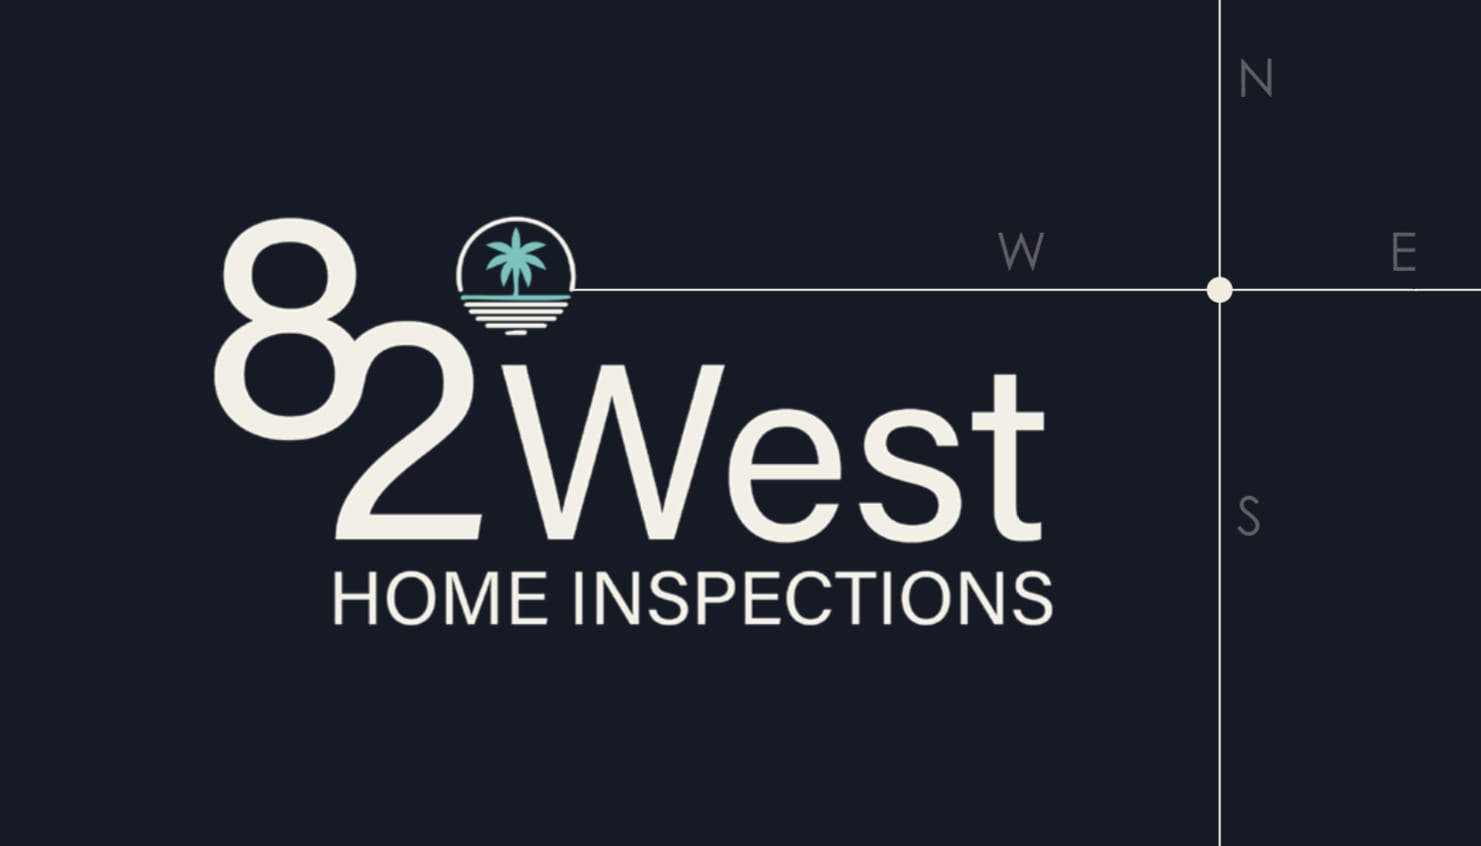 82° West Home Inspections Logo